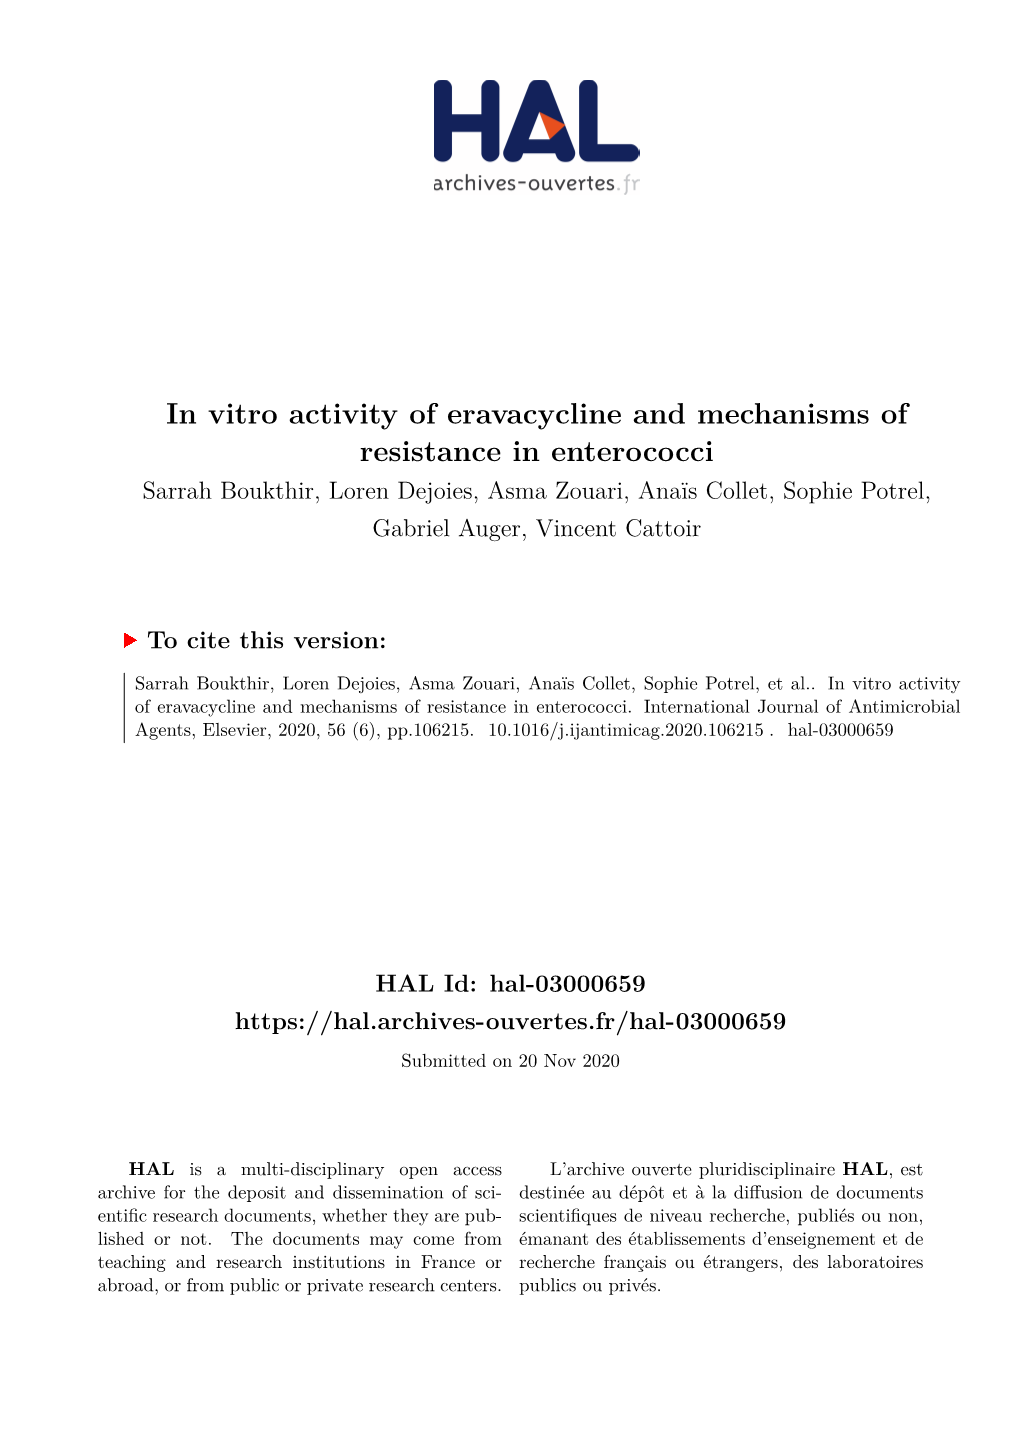 In Vitro Activity of Eravacycline and Mechanisms of Resistance In